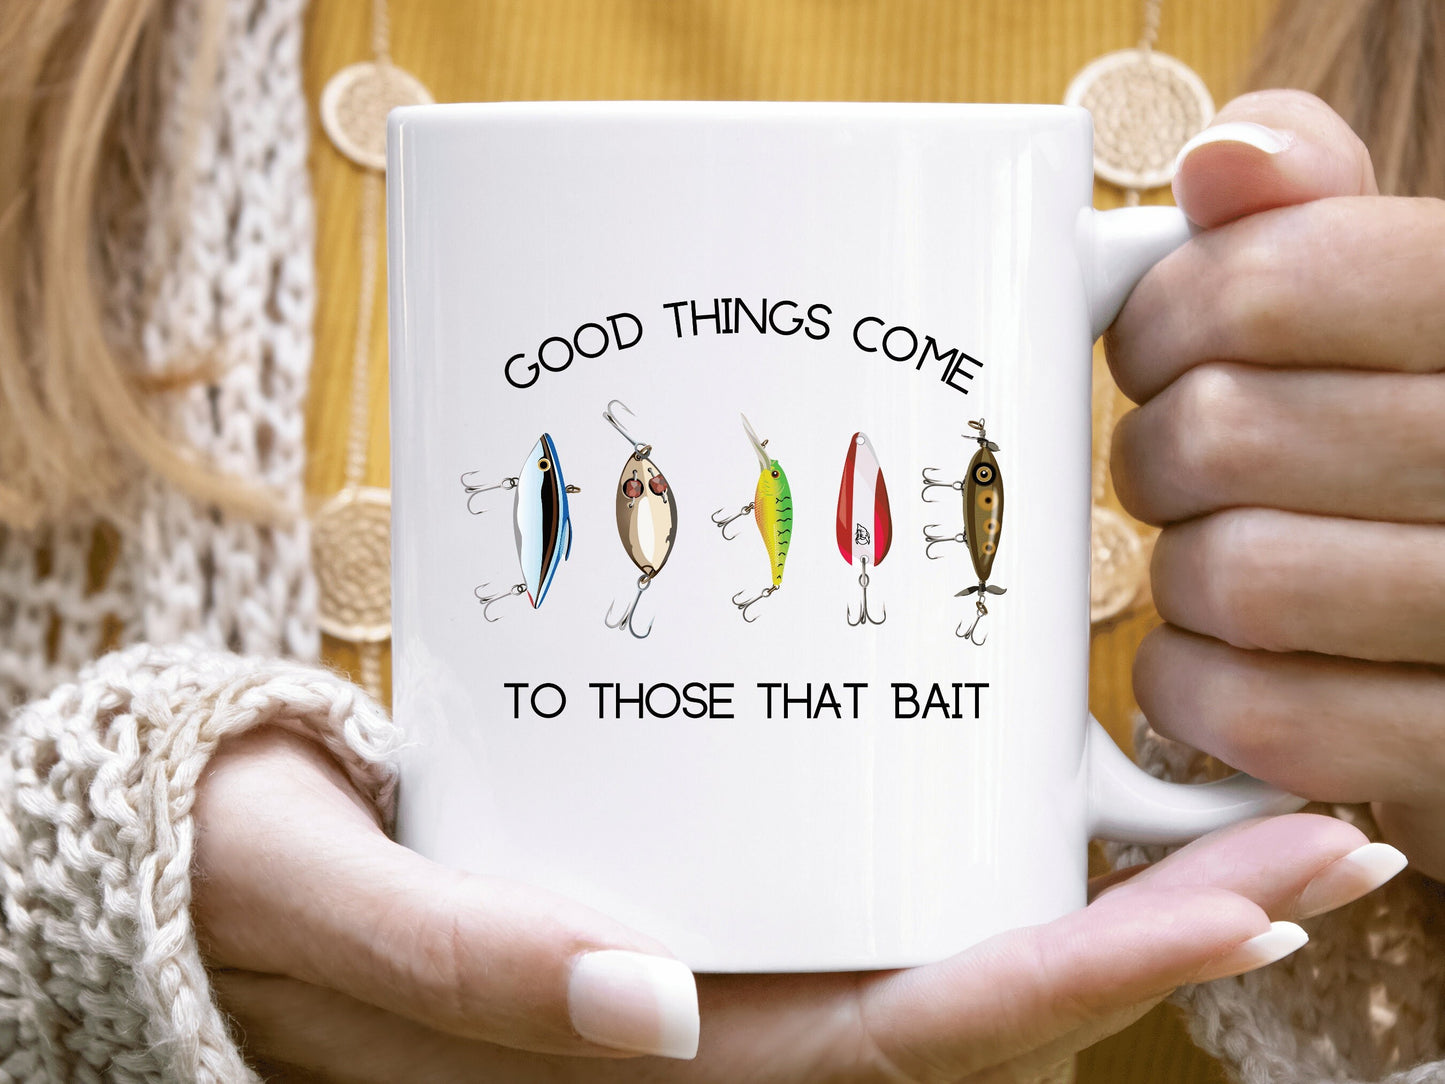 Fishing Gifts for Men, Good Things Come to Those That Bait Mug, Fishing Gift Mug, Fishing Gifts, Fishing Lure, Vintage Fishing Lure Mug,